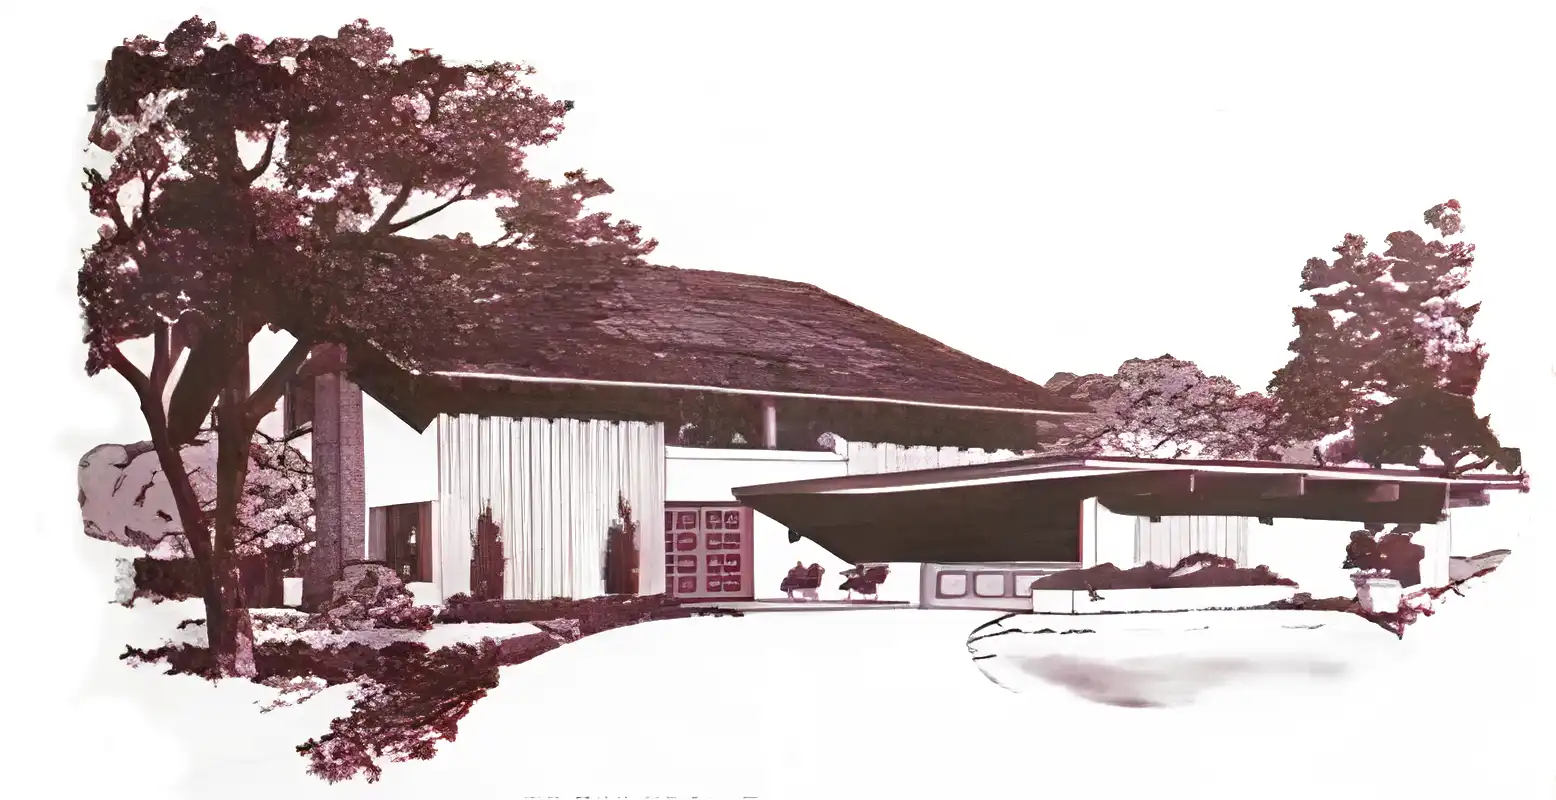 Monochrome rendering of 1960s 2 story house, variant combining gable roof with flat roofed garage.